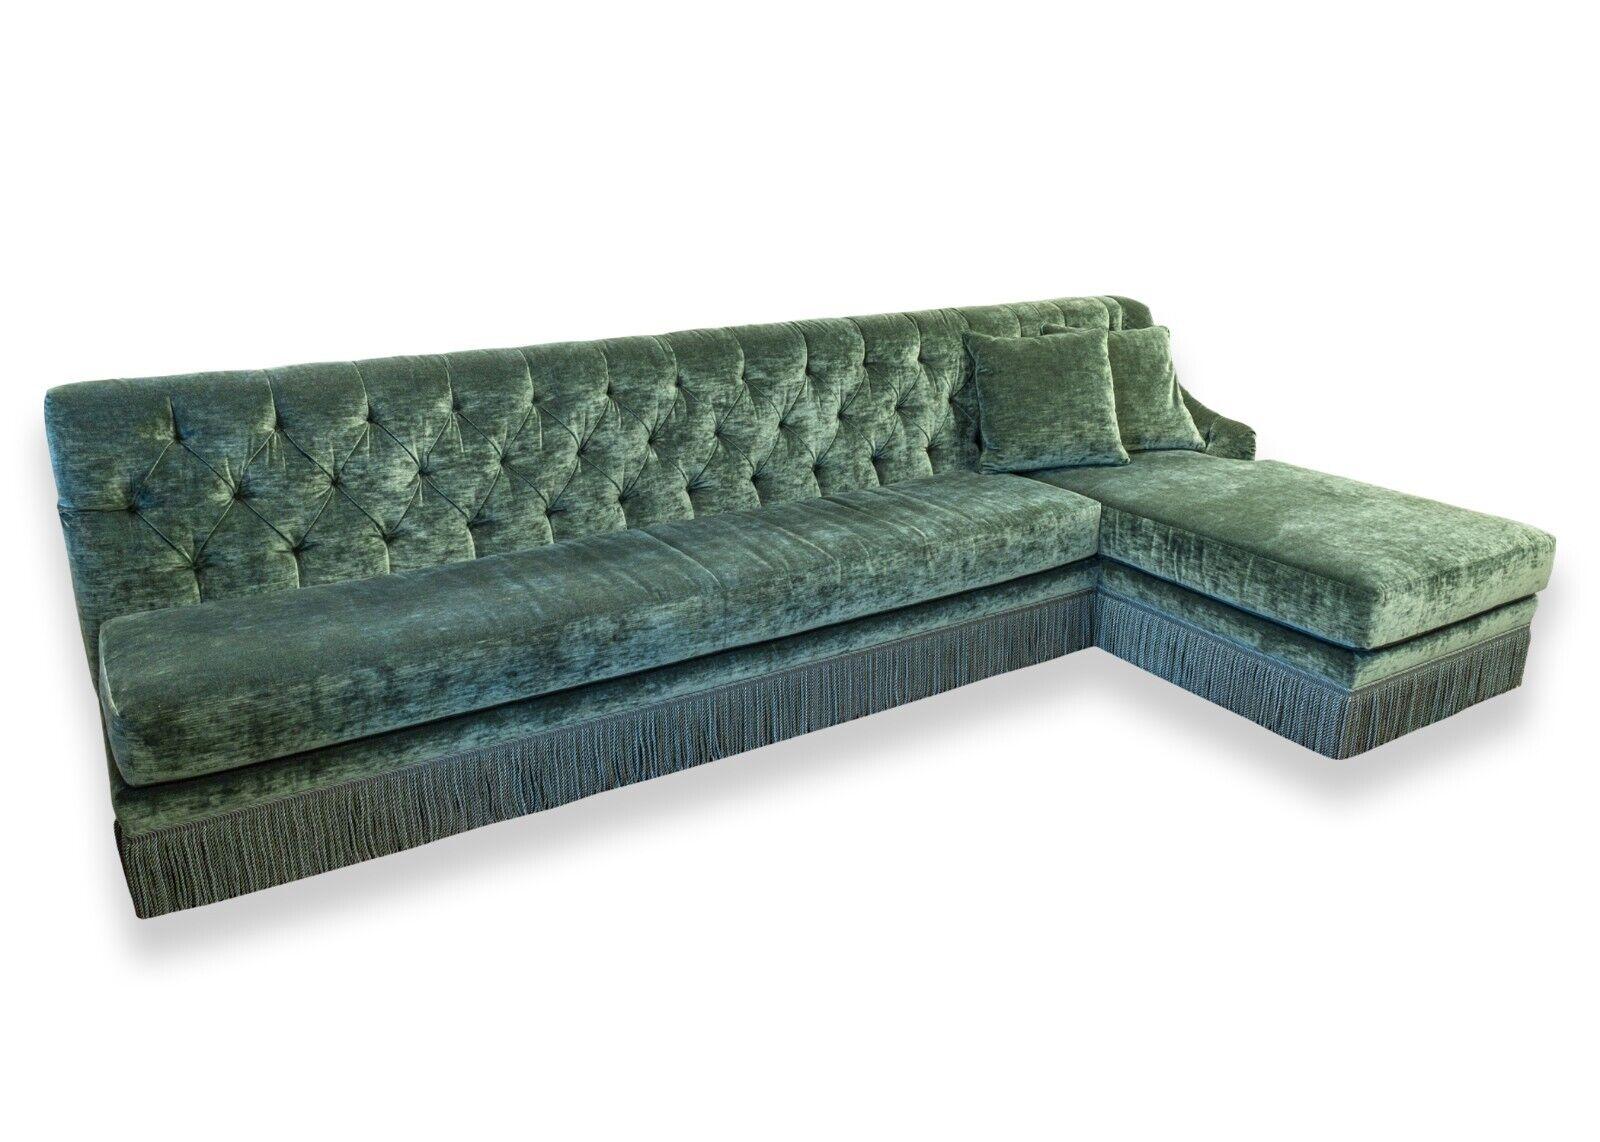 A custom made monumental tufted green velvet Hollywood regency style sectional sofa. Custom made by Keva. This absolutely incredible custom made sofa demands a lot of attention for its elegant design, massive size, and its gorgeous green velvet.